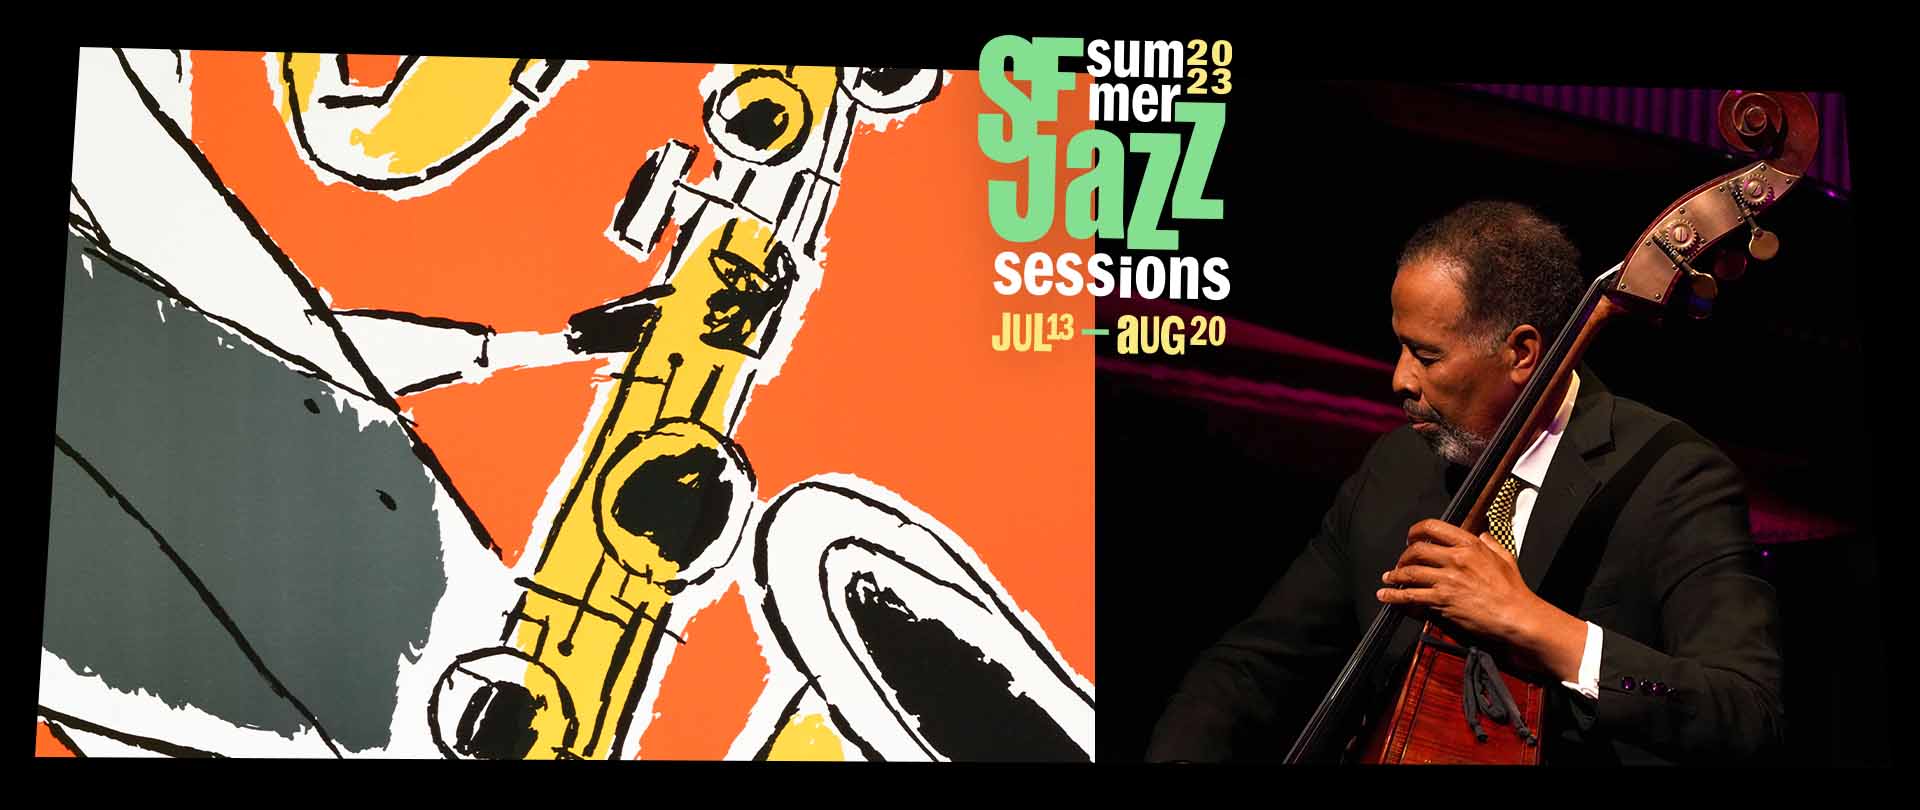 Stanley Clarke performing on stage at SFJAZZ, with the 2023 Summer Sessions artwork